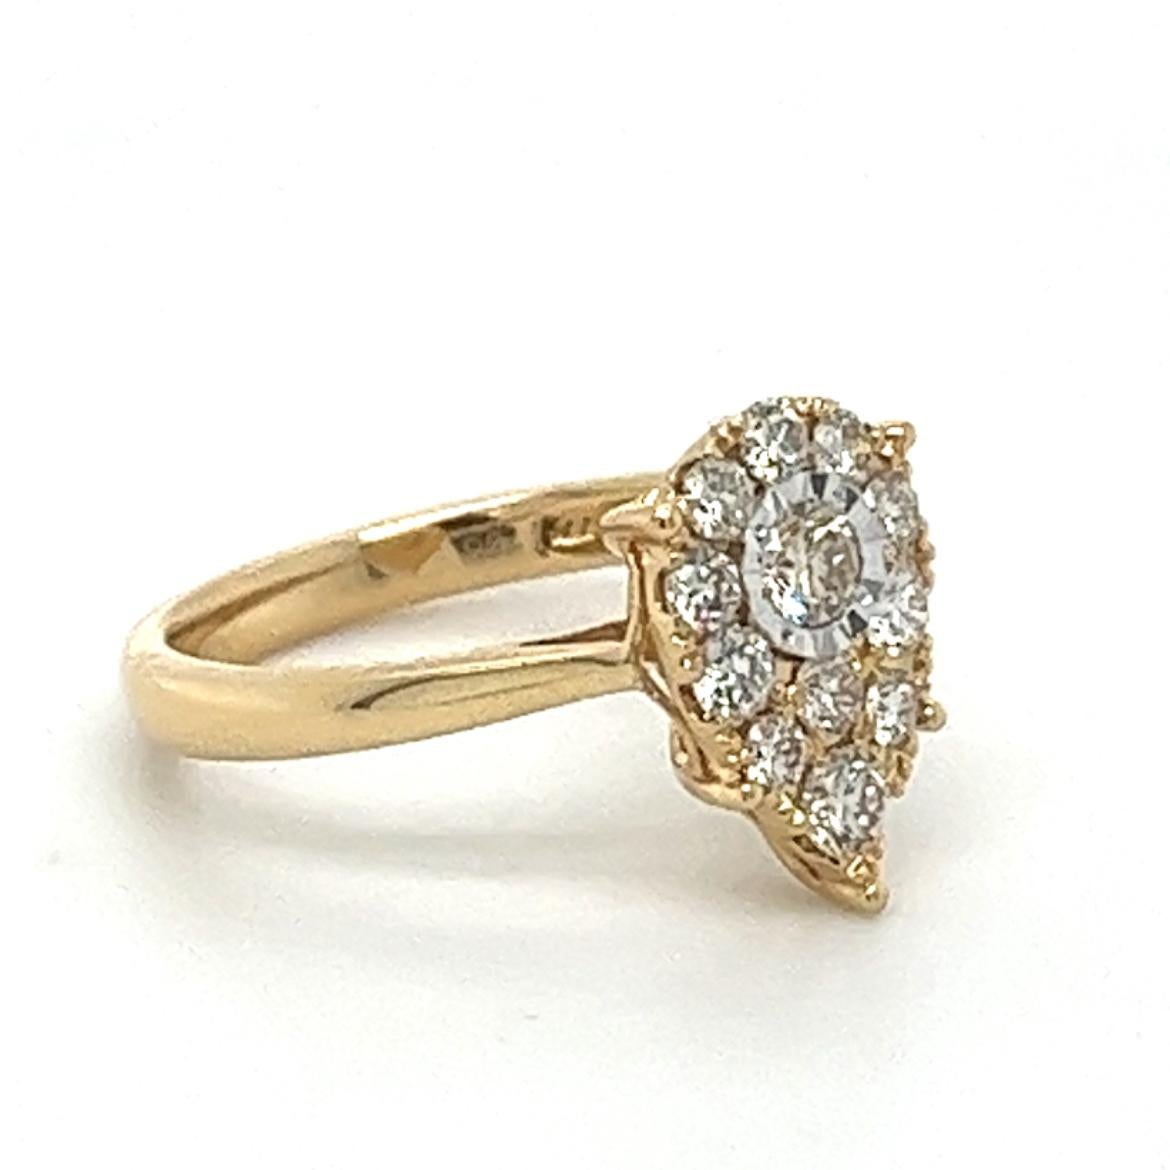 18K Yellow Gold Diamond Heart Lover's Ring

18K Yellow Gold - 3.32 GM
12 Diamonds - 0.67 CT

This exquisite 18K yellow gold ring is a timeless symbol of enduring love. Featuring a captivating heart-shaped diamond, it embodies the eternal bond